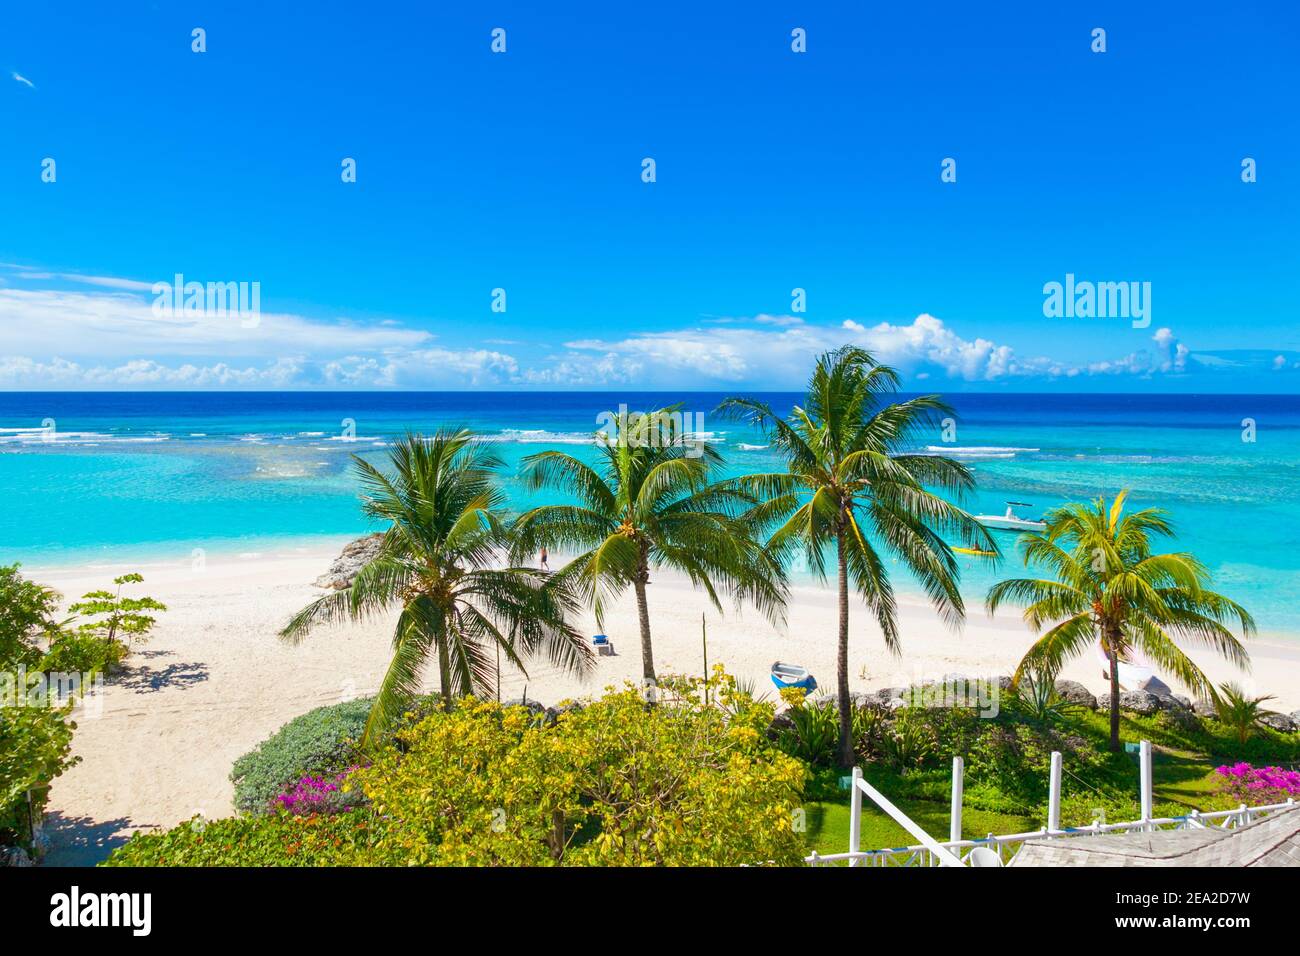 Paradise beach. Sunny beach with palm and turquoise sea. Worthing beach in Barbados. Stock Photo